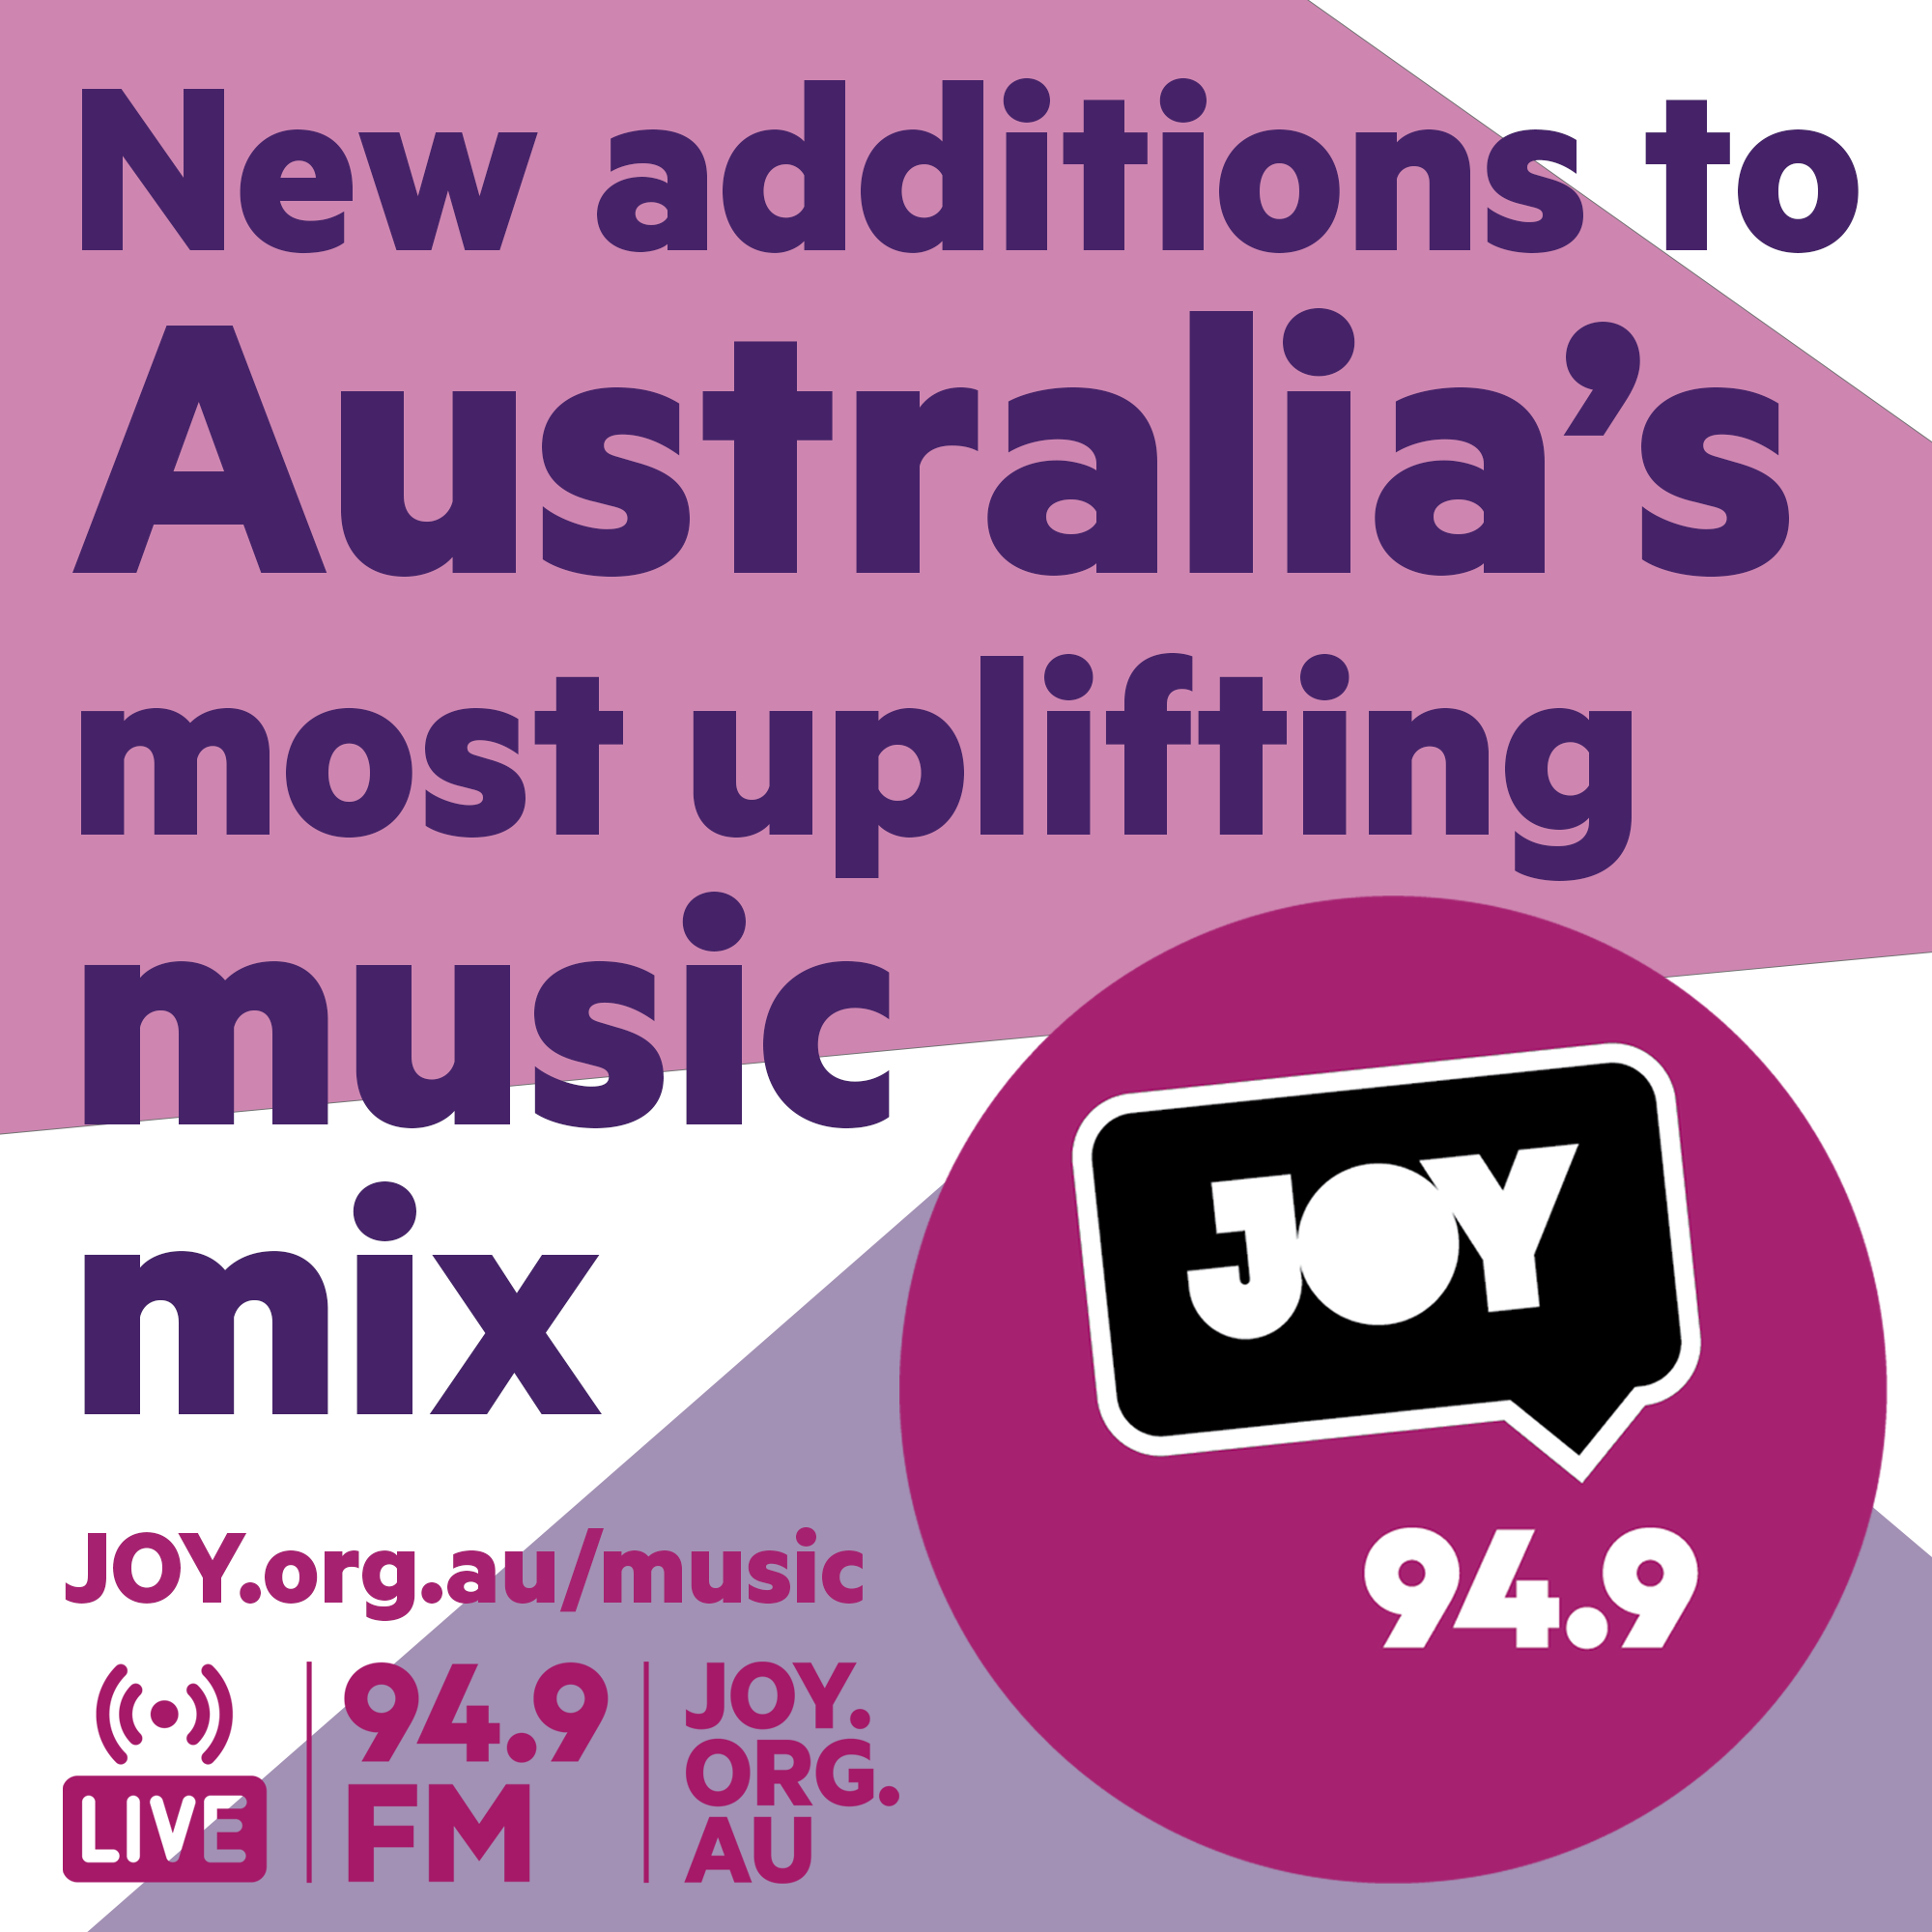 The newest songs to Australia’s most uplifting music mix: 1 June 2022